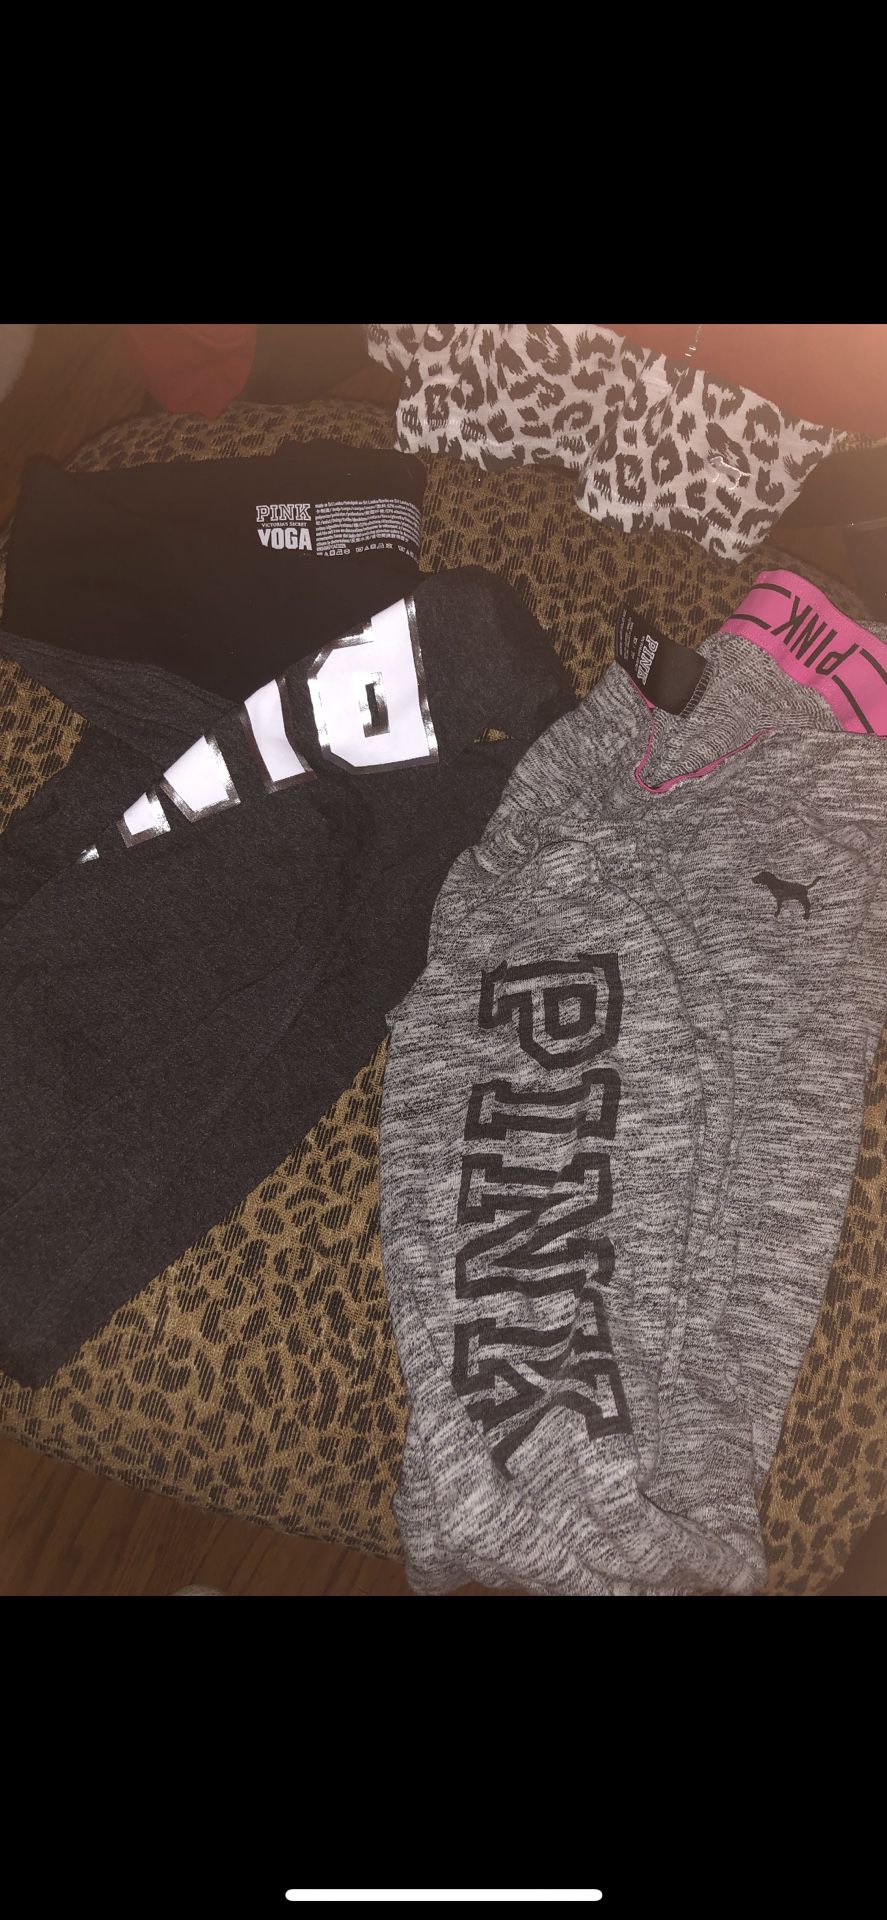 VS Pink joggers leggings hoodie and tank top - All size XS